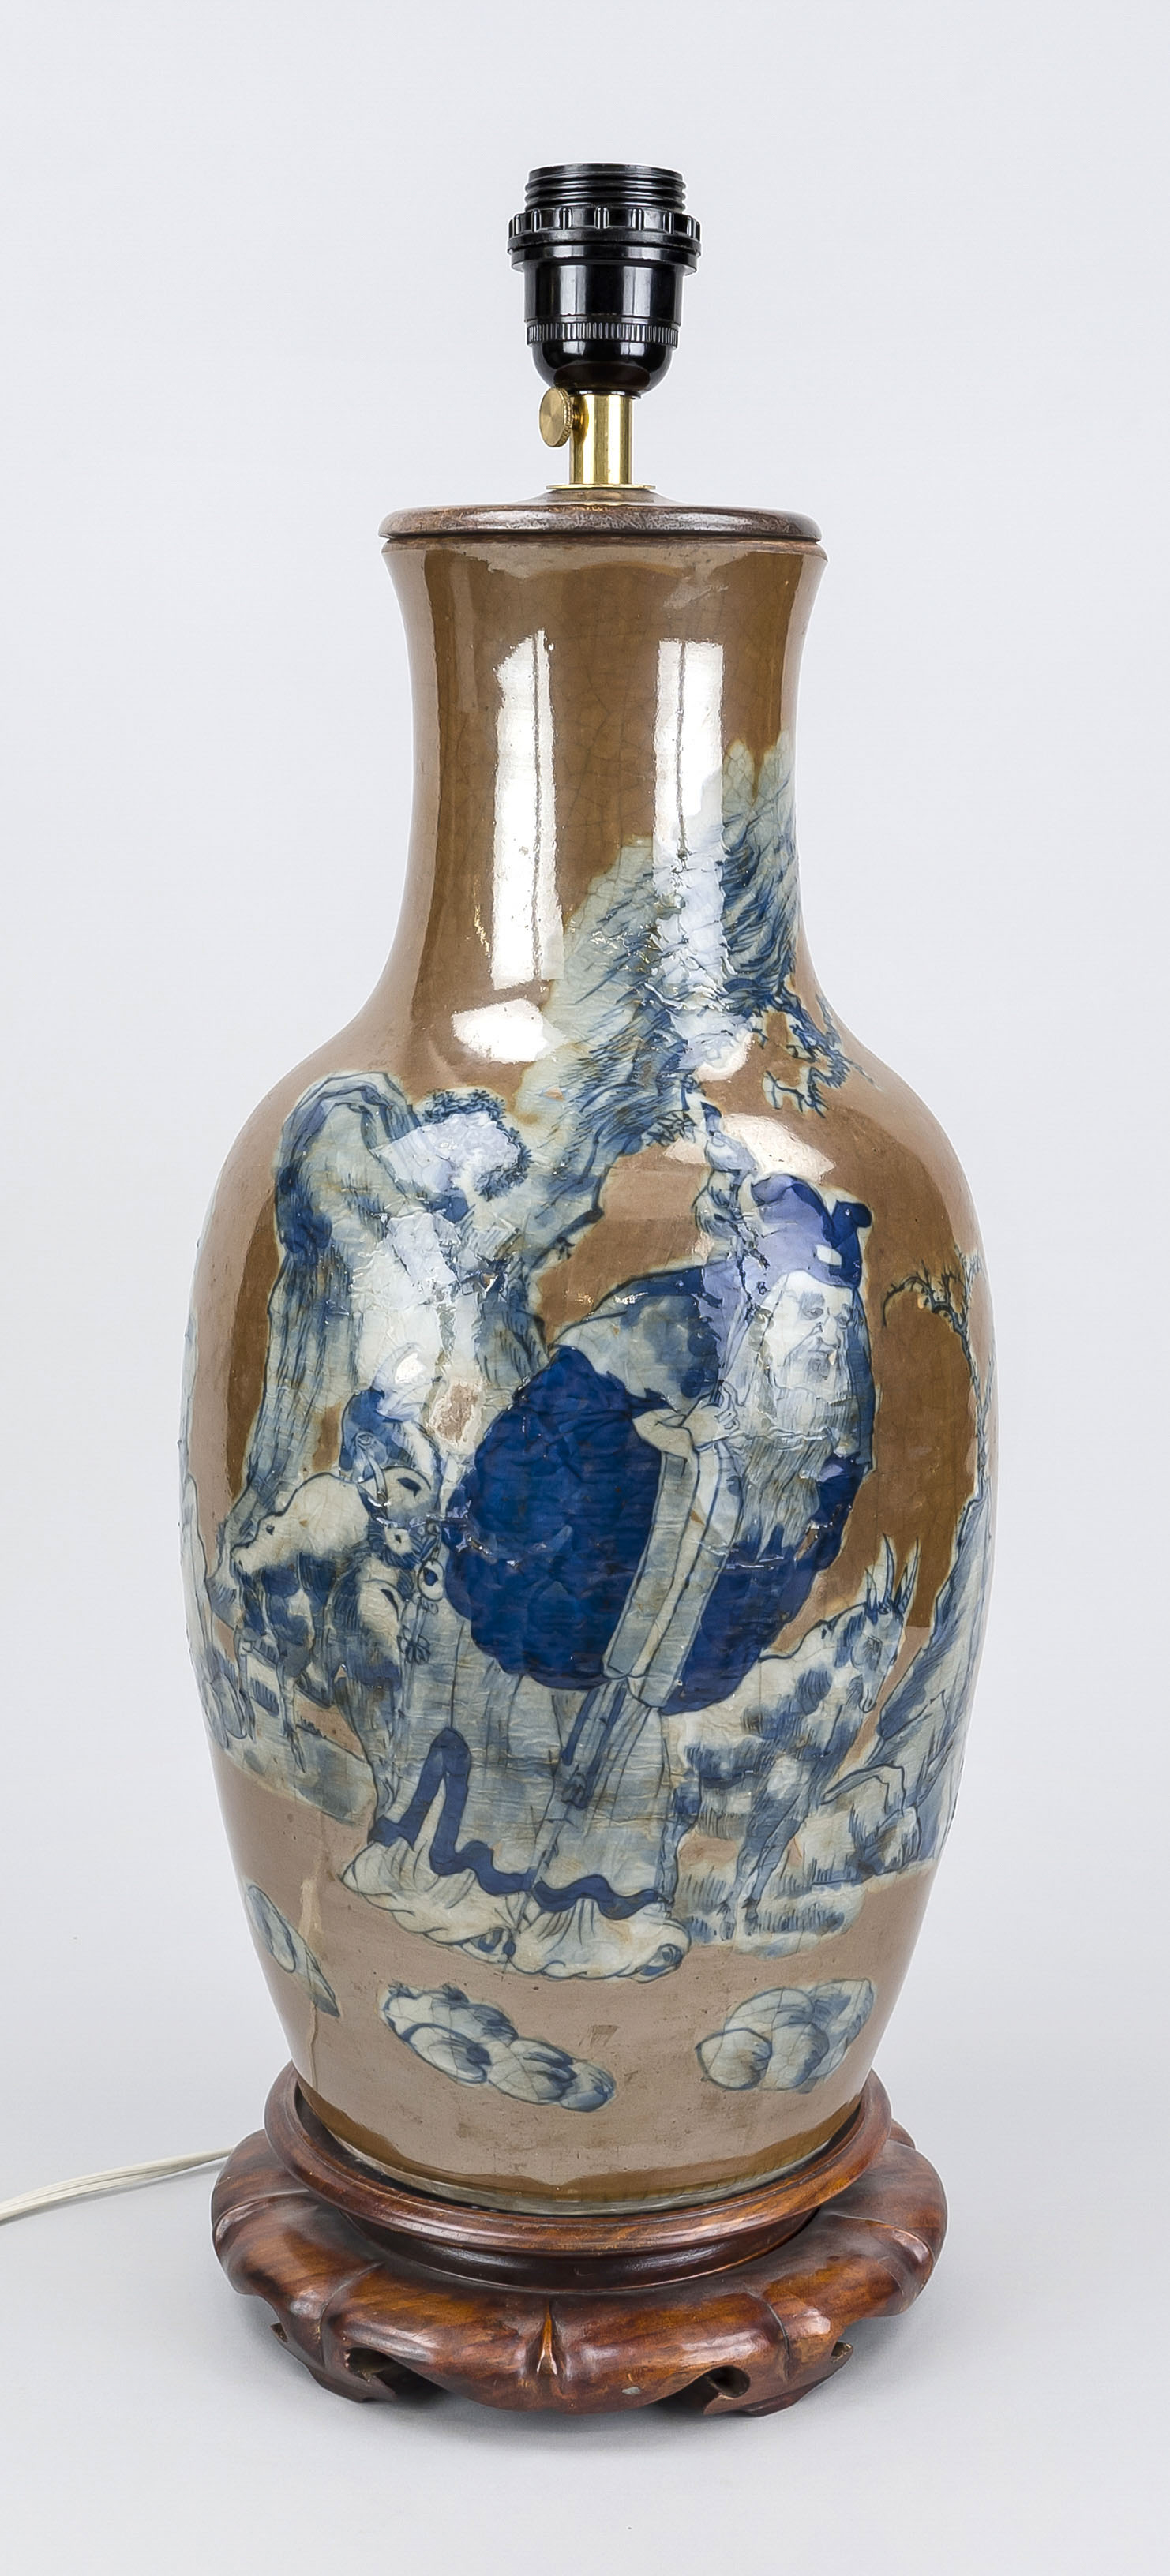 Vase with lamp mounting, China, 19th/20th century, cobalt blue painting with goatherds in a rocky